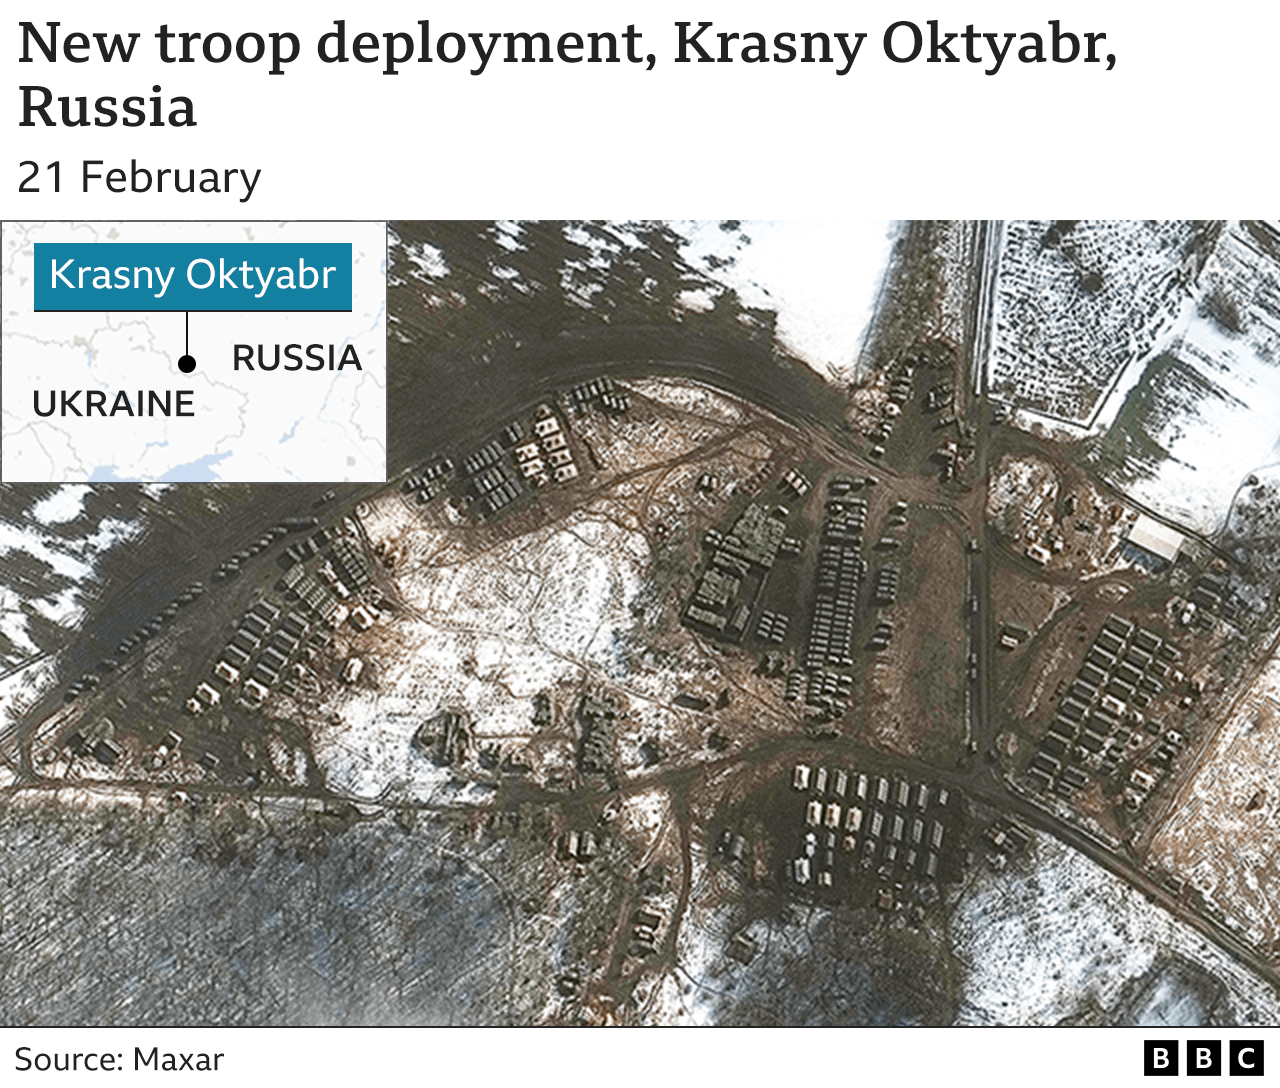 New deployments of troops and equipment less than 20km north-west of the border with Ukraine